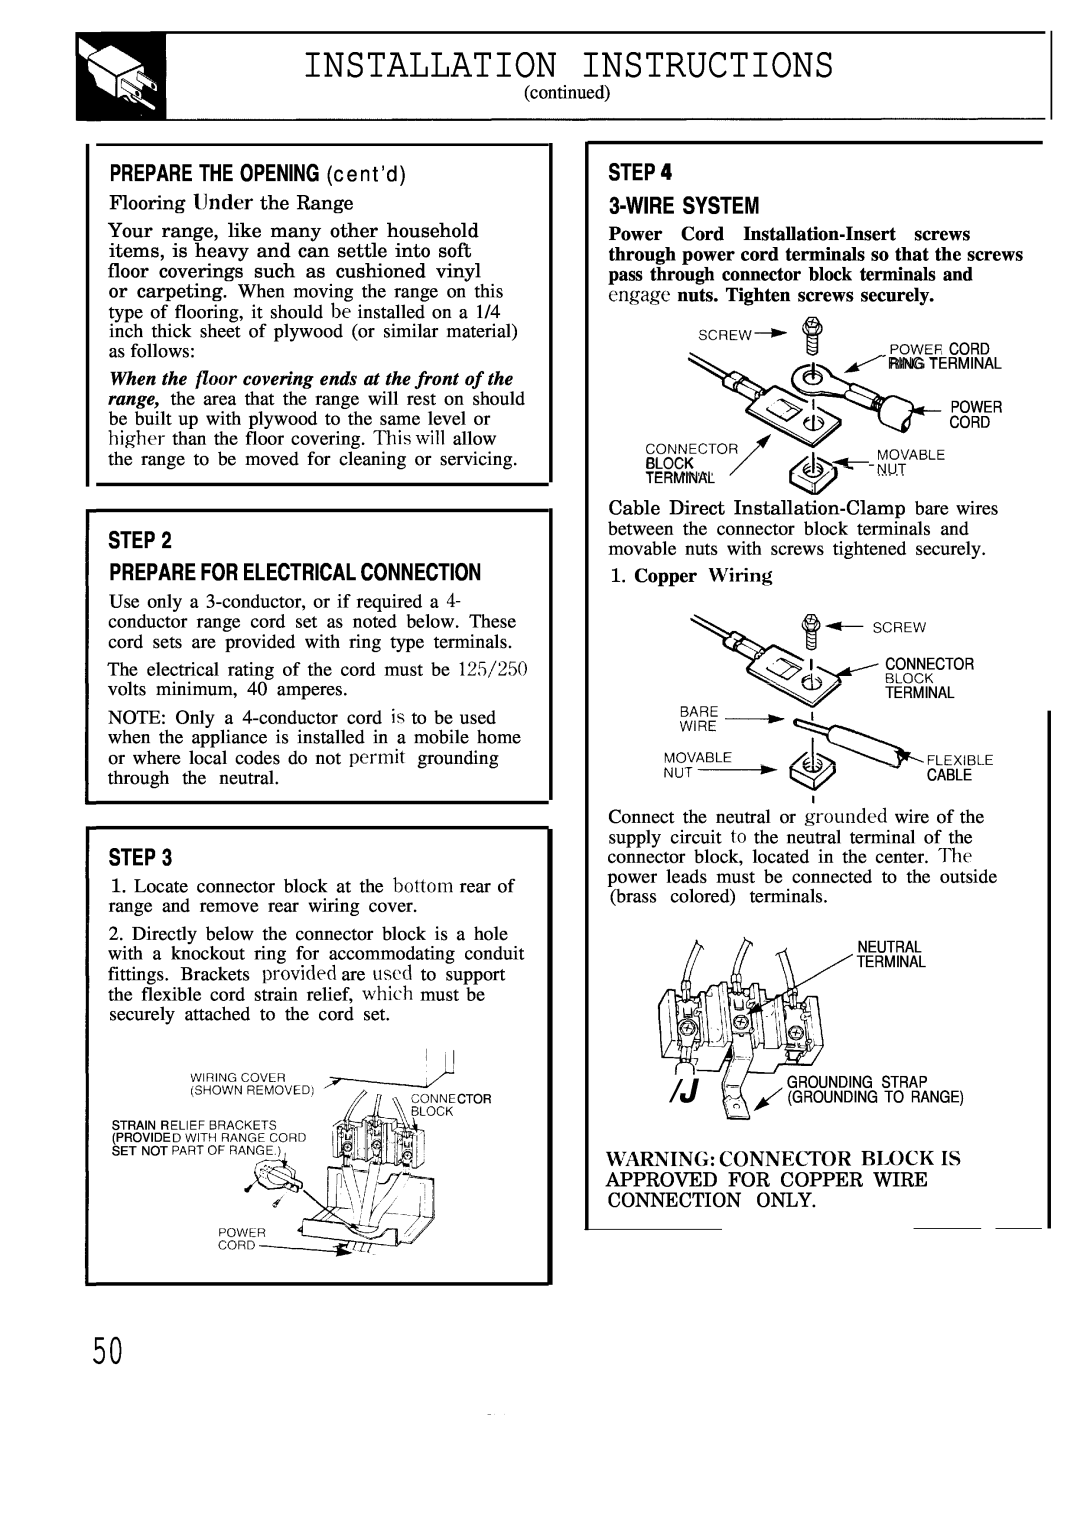 GE JBP80 Installation Instructions, PREPARE THE OPENING cent’d, Wire System, Step Prepare For Electrical Connection 